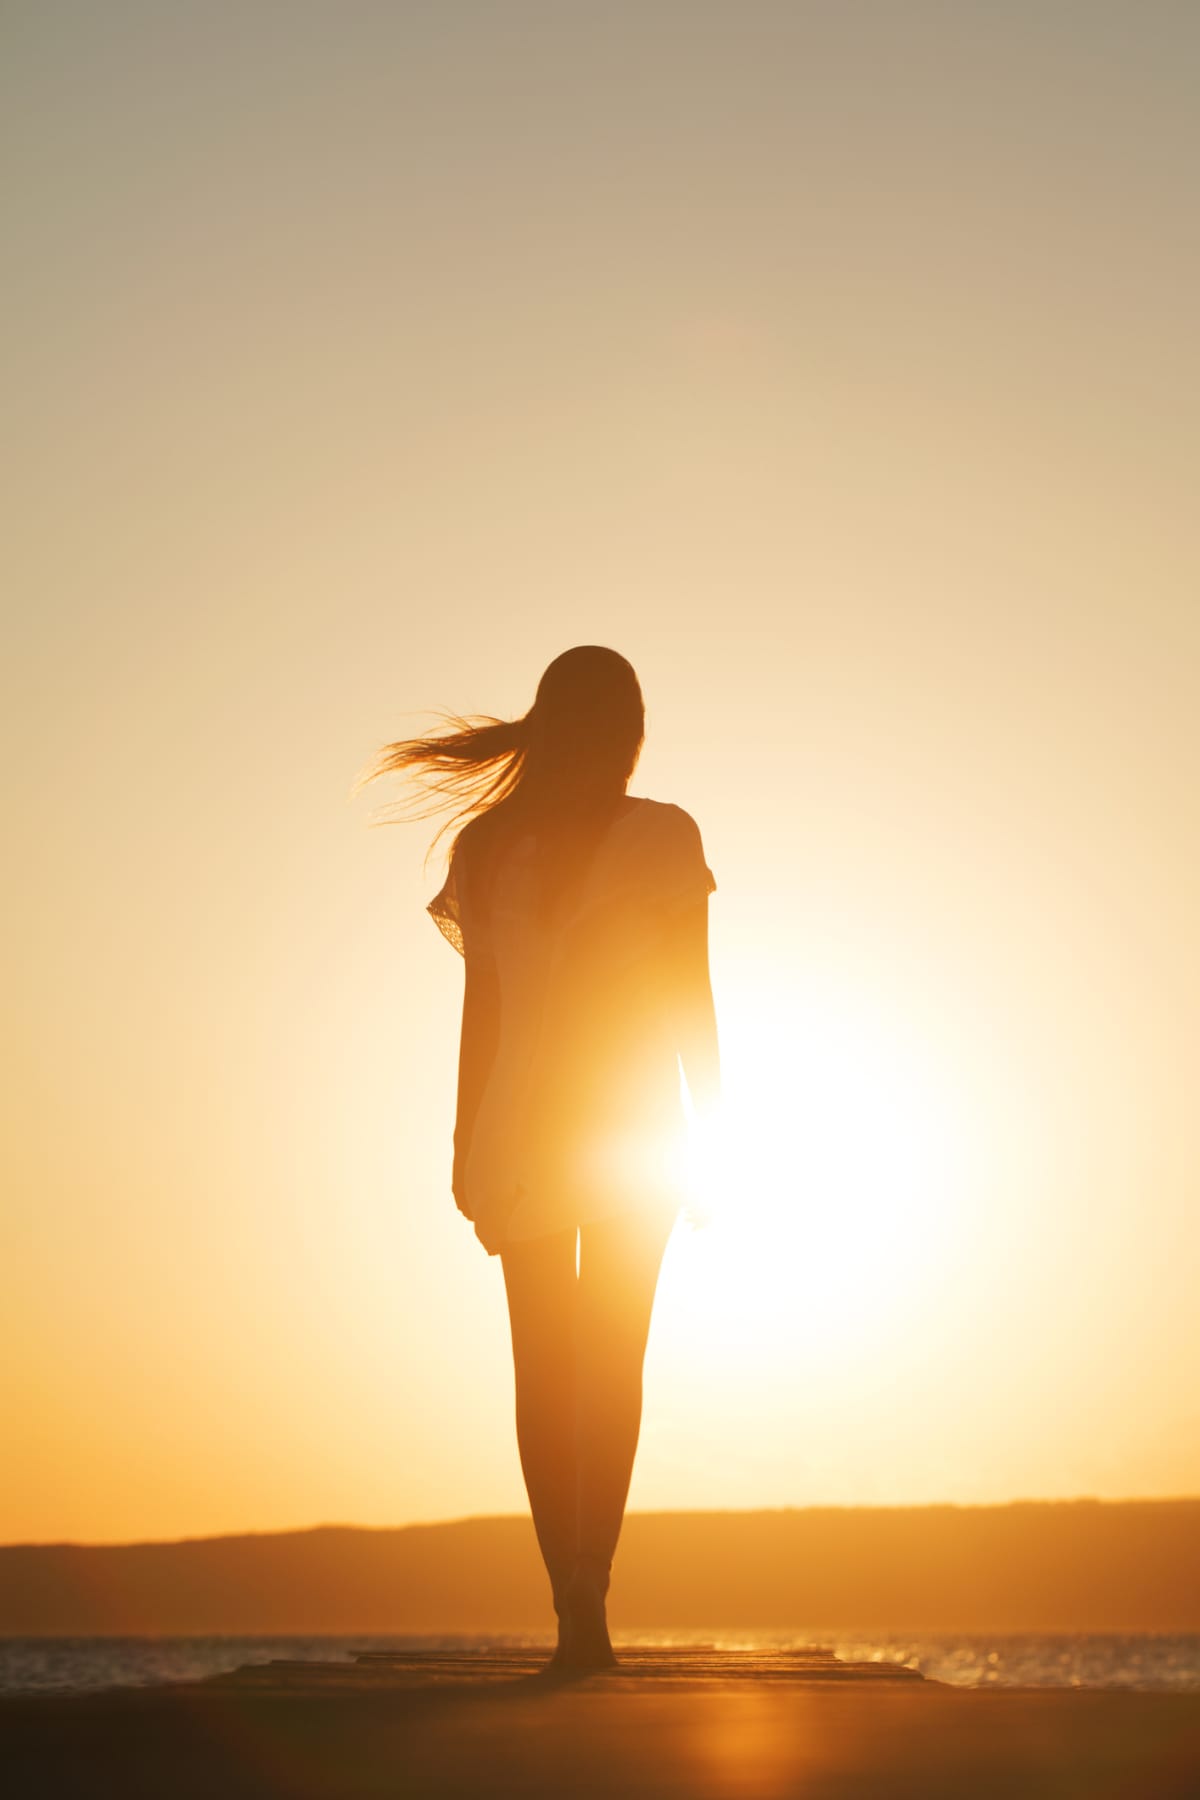 A silhouette of a woman facing the sun